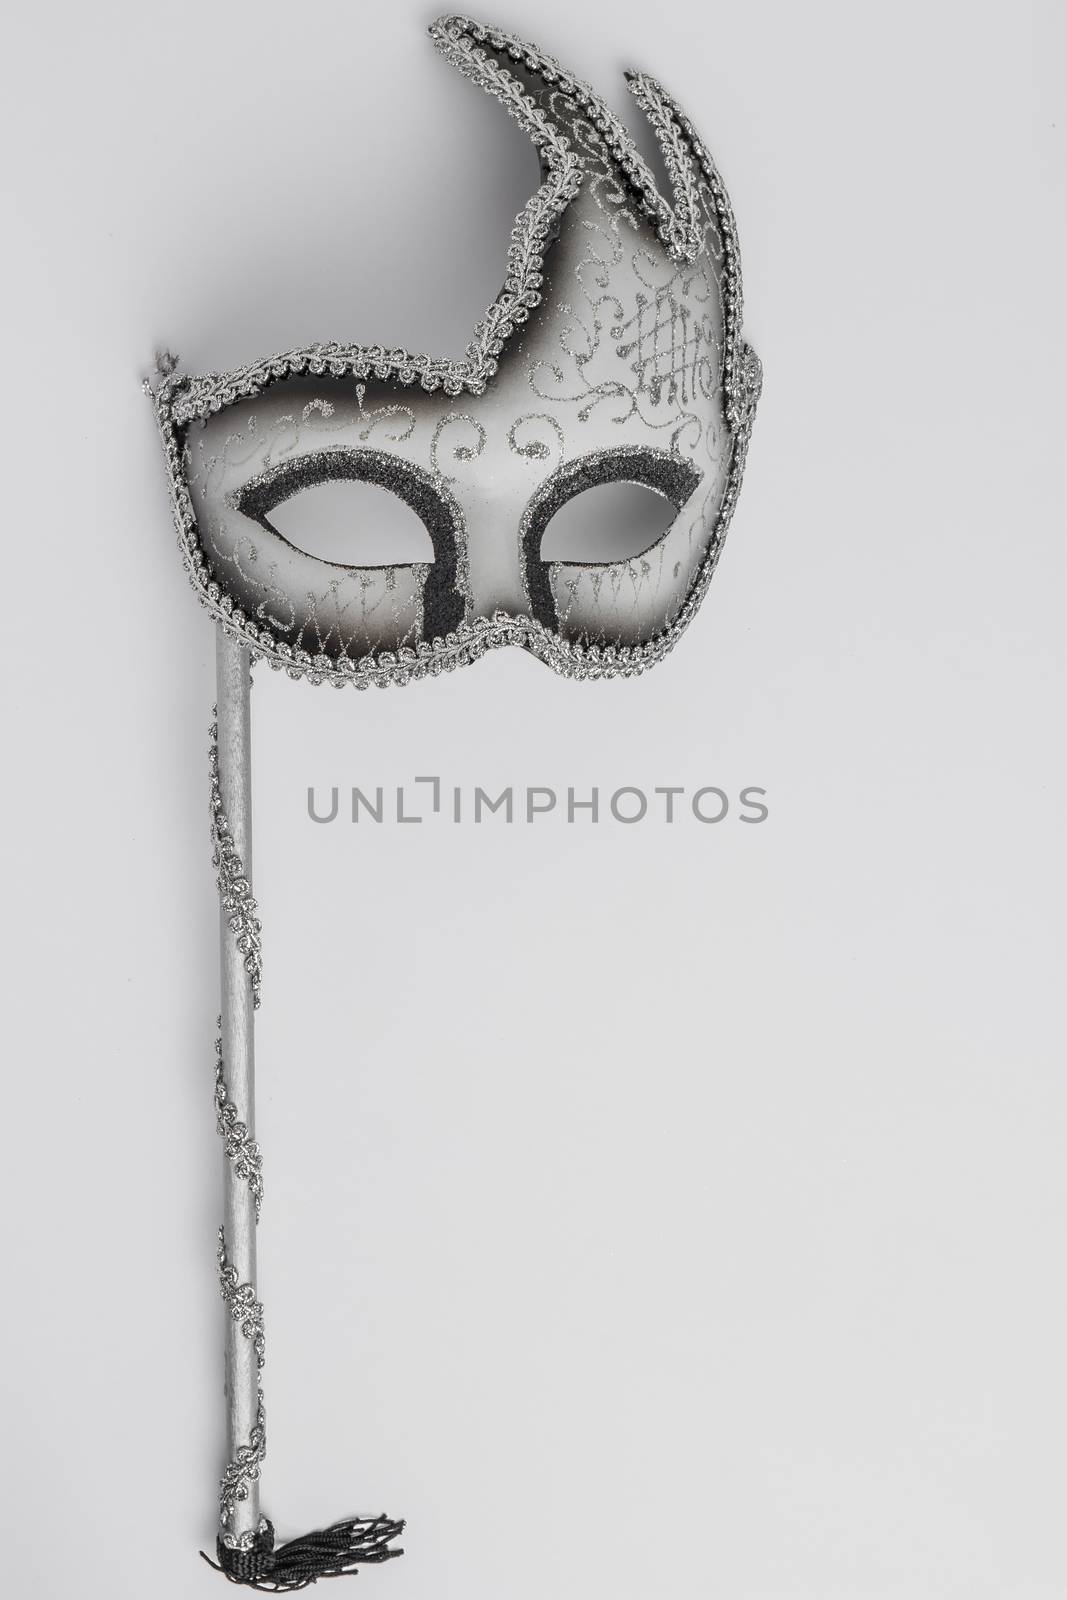 Colorful carnival mask by AnaMarques